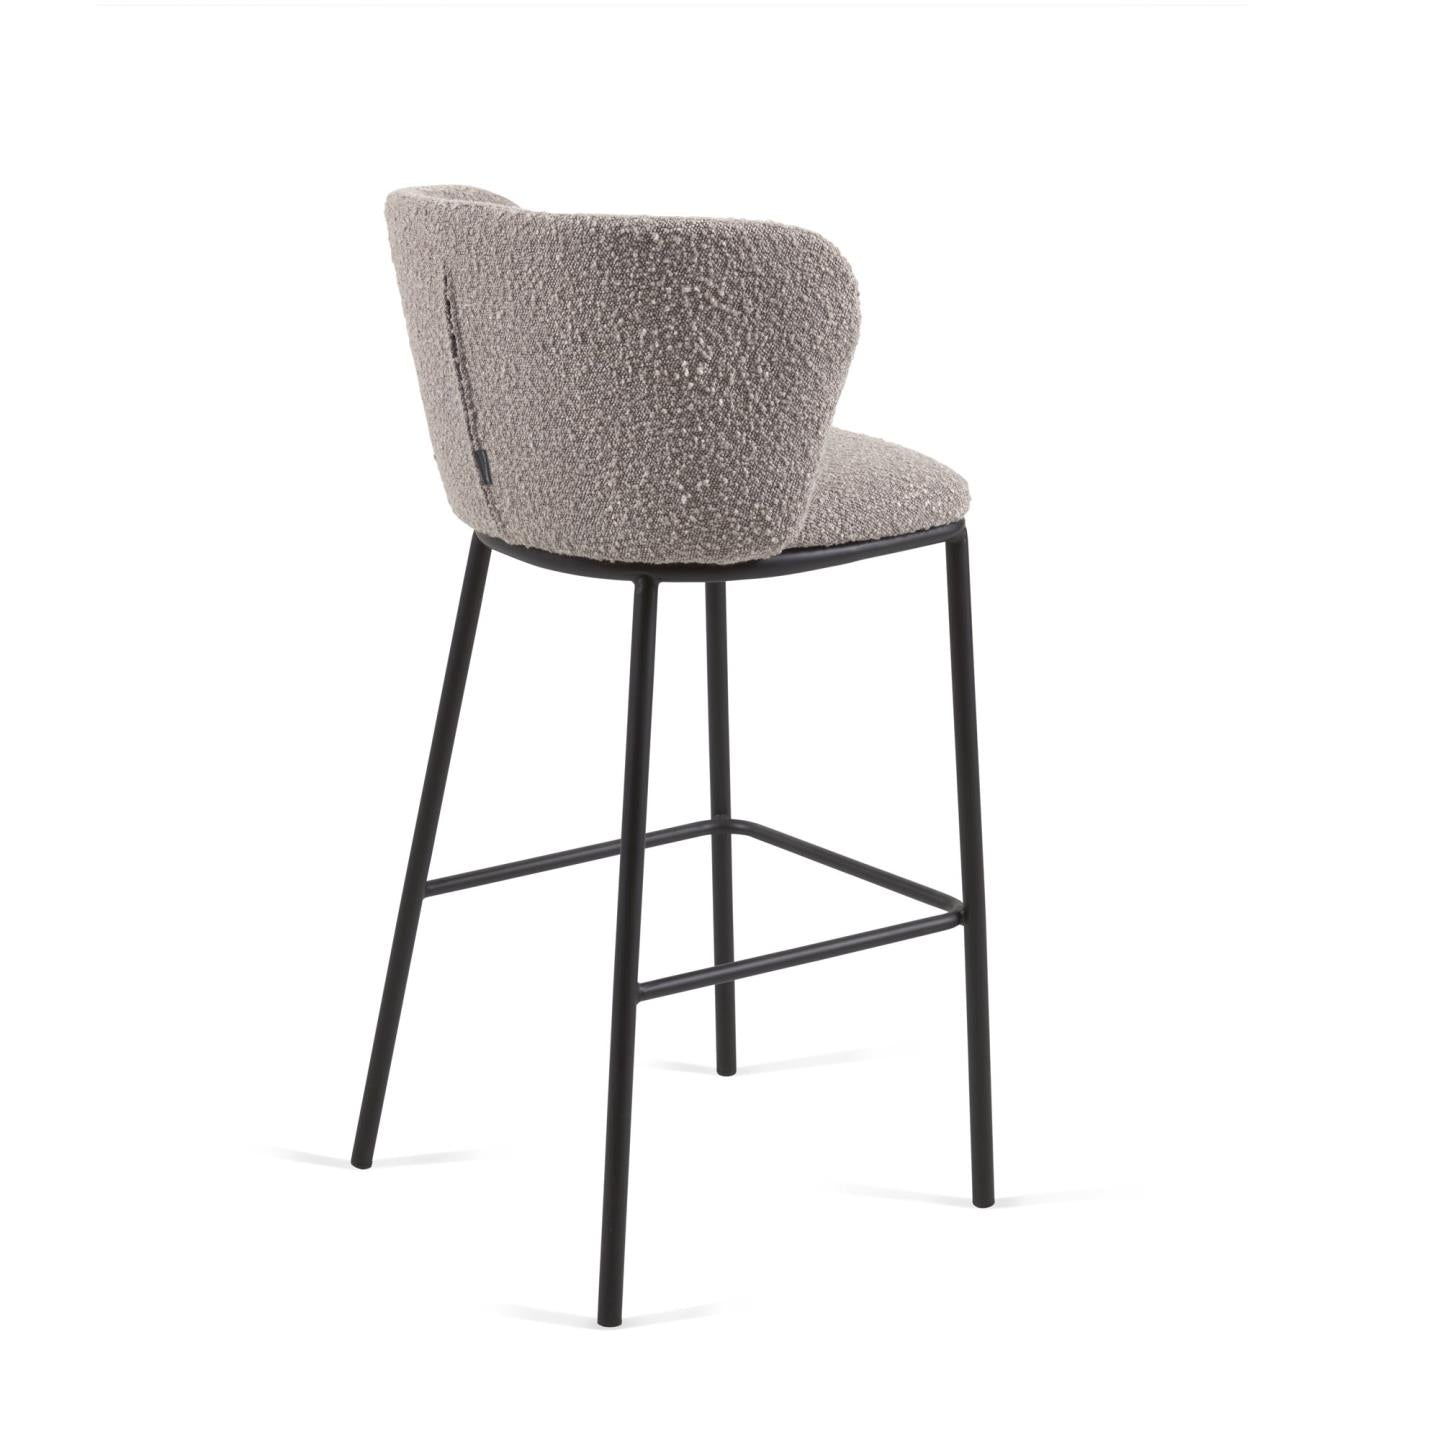 Ciselia stool with light grey shearling and black metal, height 75 cm